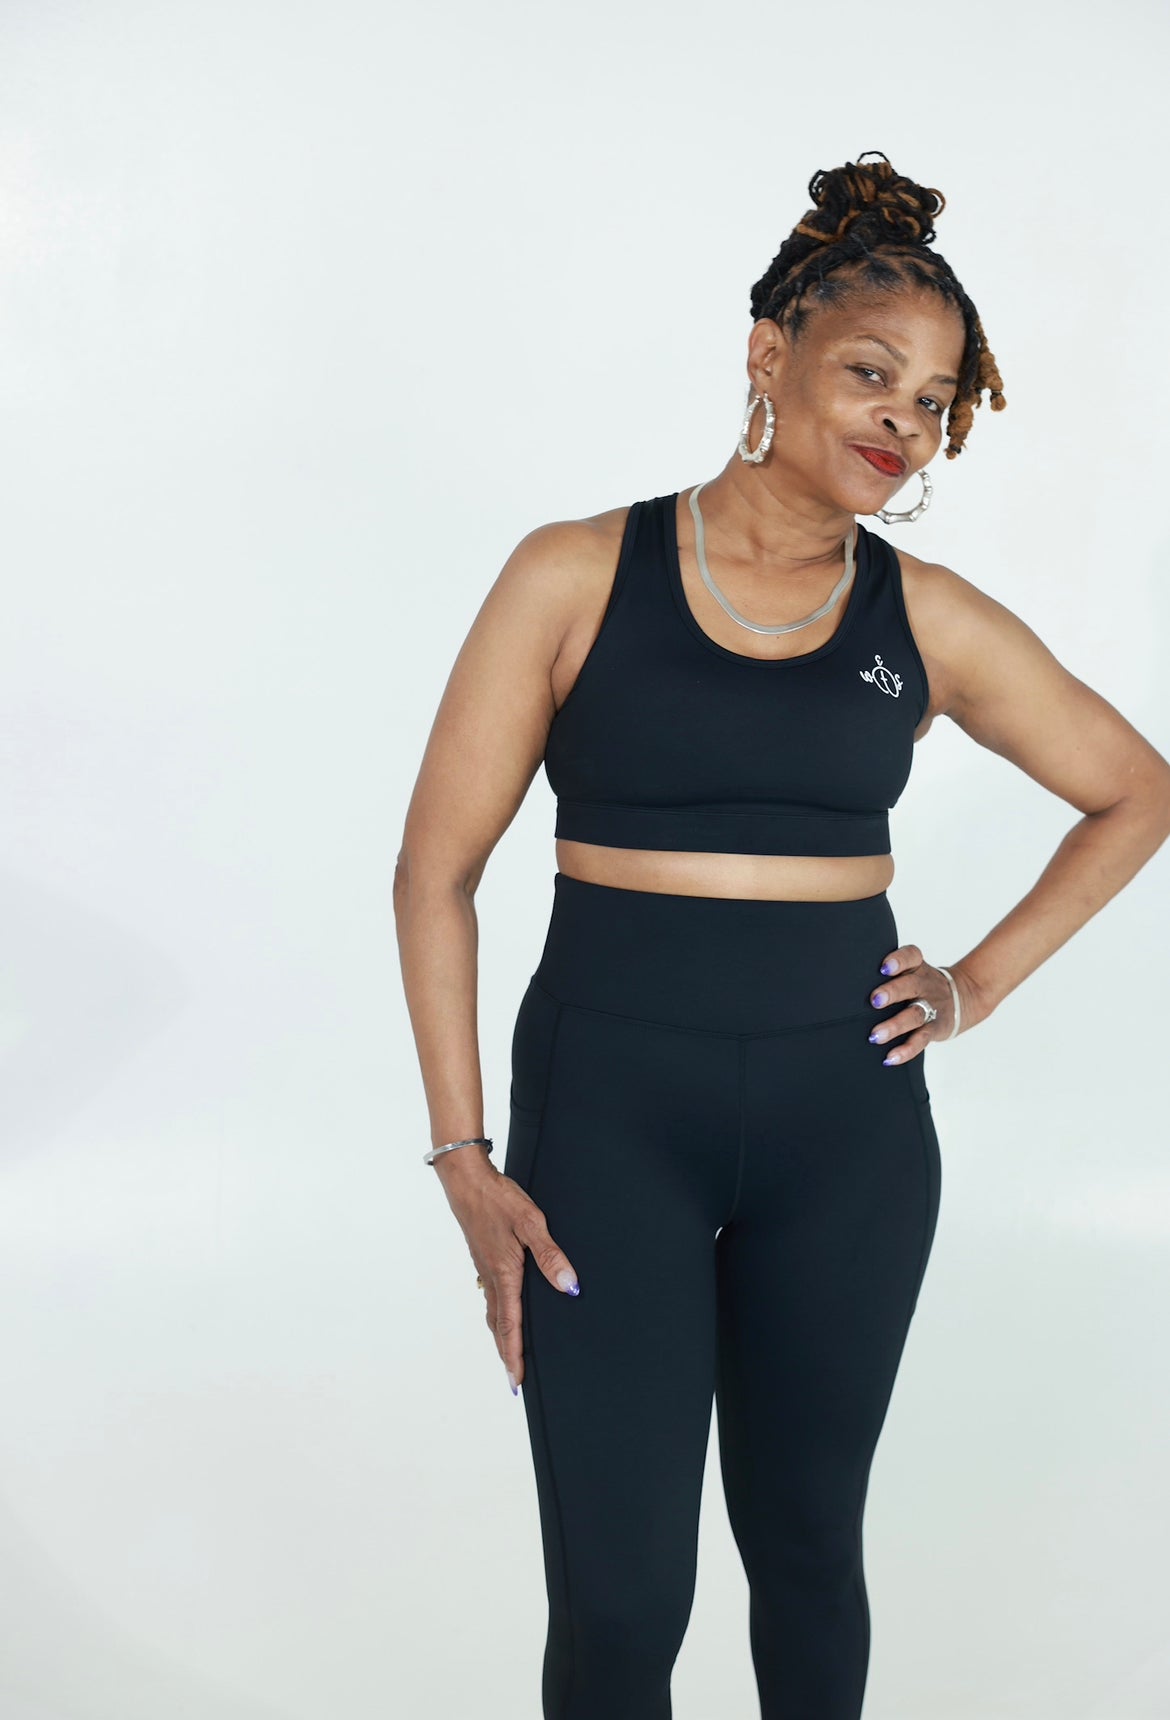 Strappy Back Sports Bra – The WestWay Active